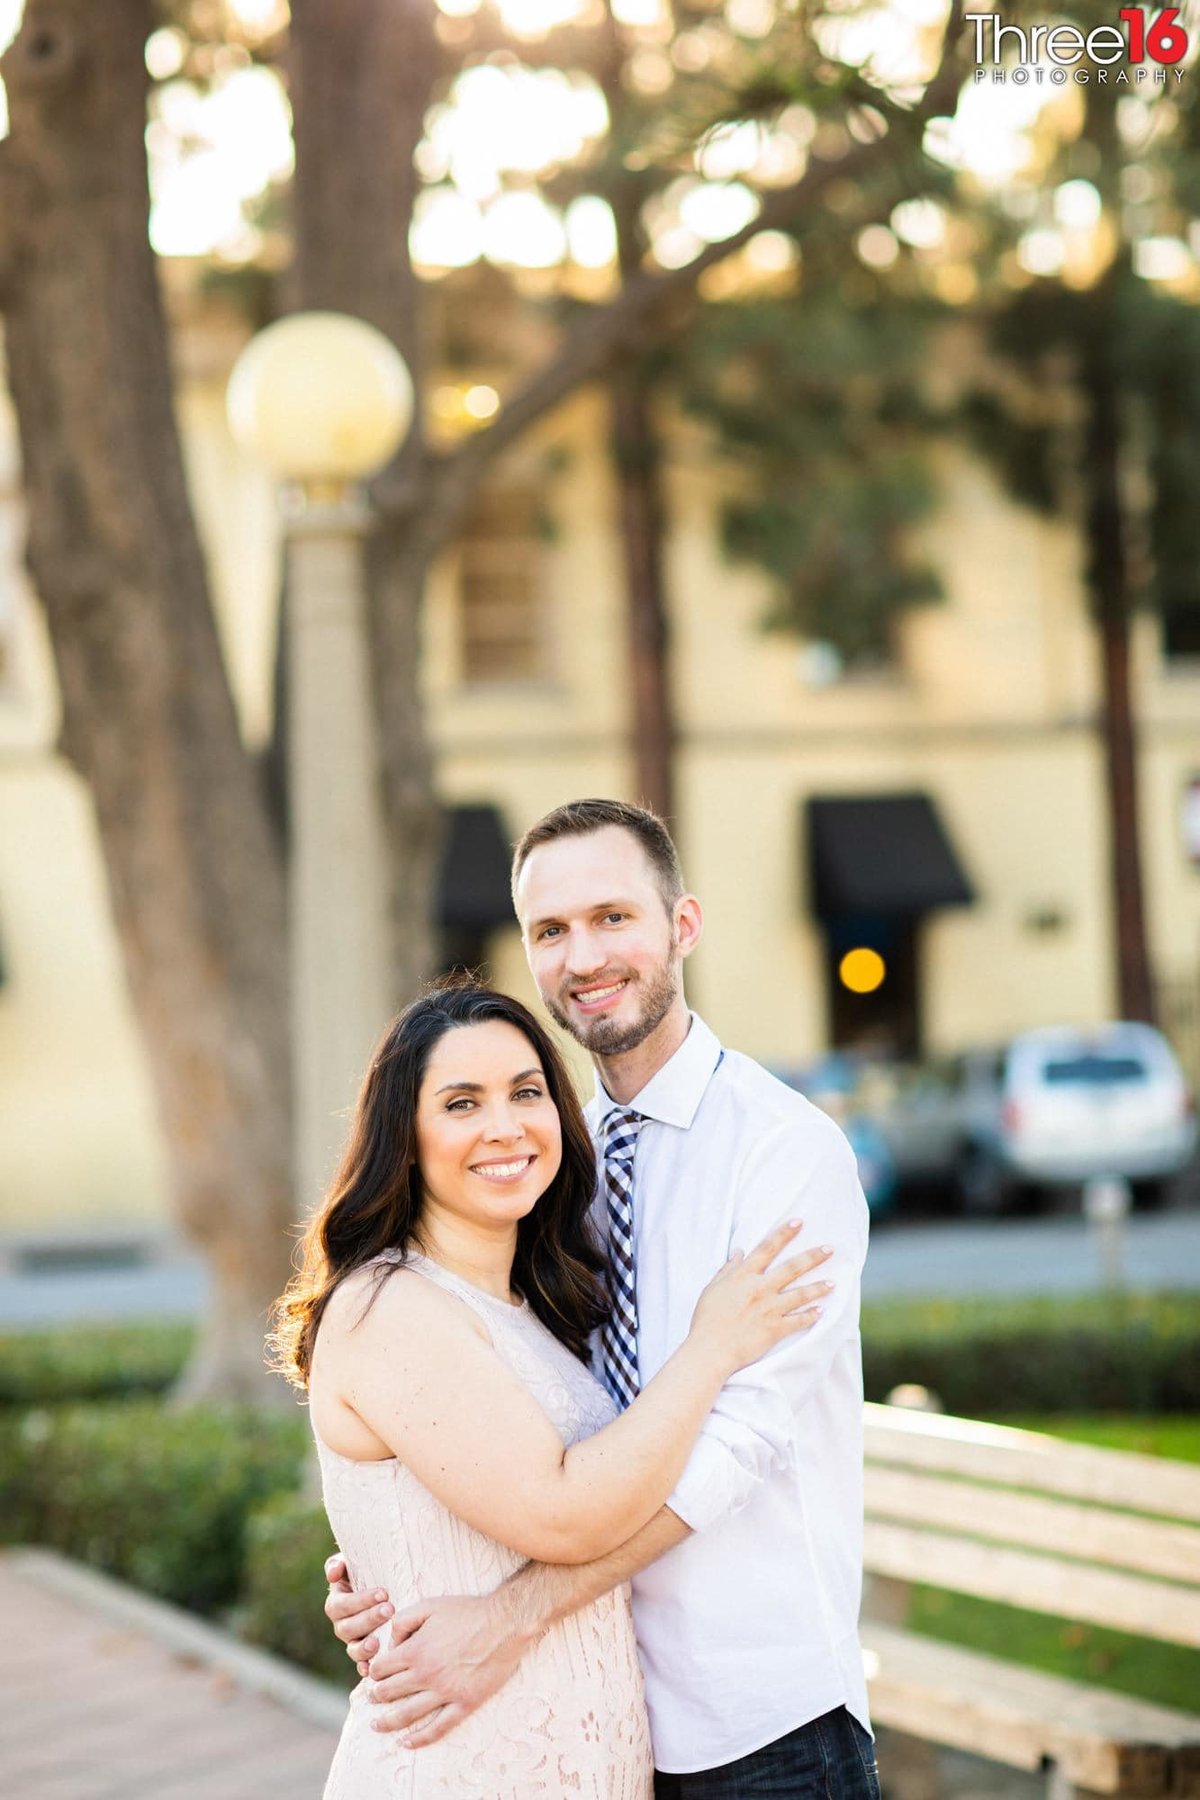 Engaged couple embrace one another and smile for the photographer